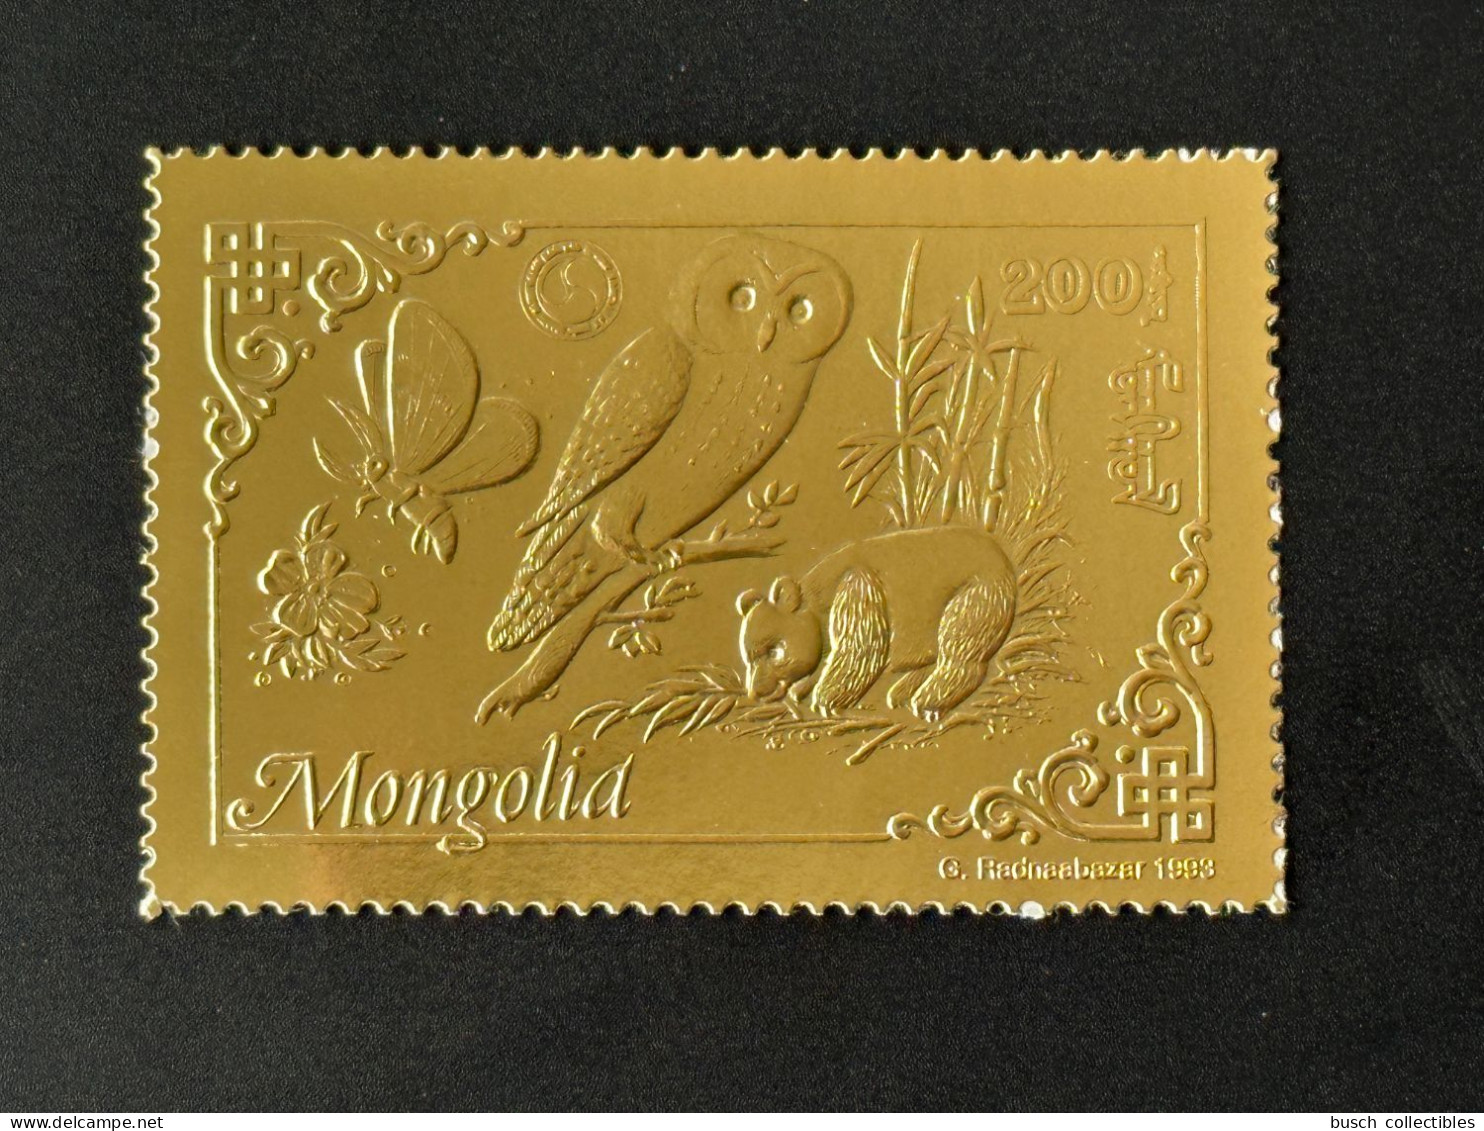 Mongolie Mongolia 1993 Mi. 2475 A Or Gold Rotary Lions Butterfly Owl Eule Panda Papillon Schmetterling Chouette - Bears